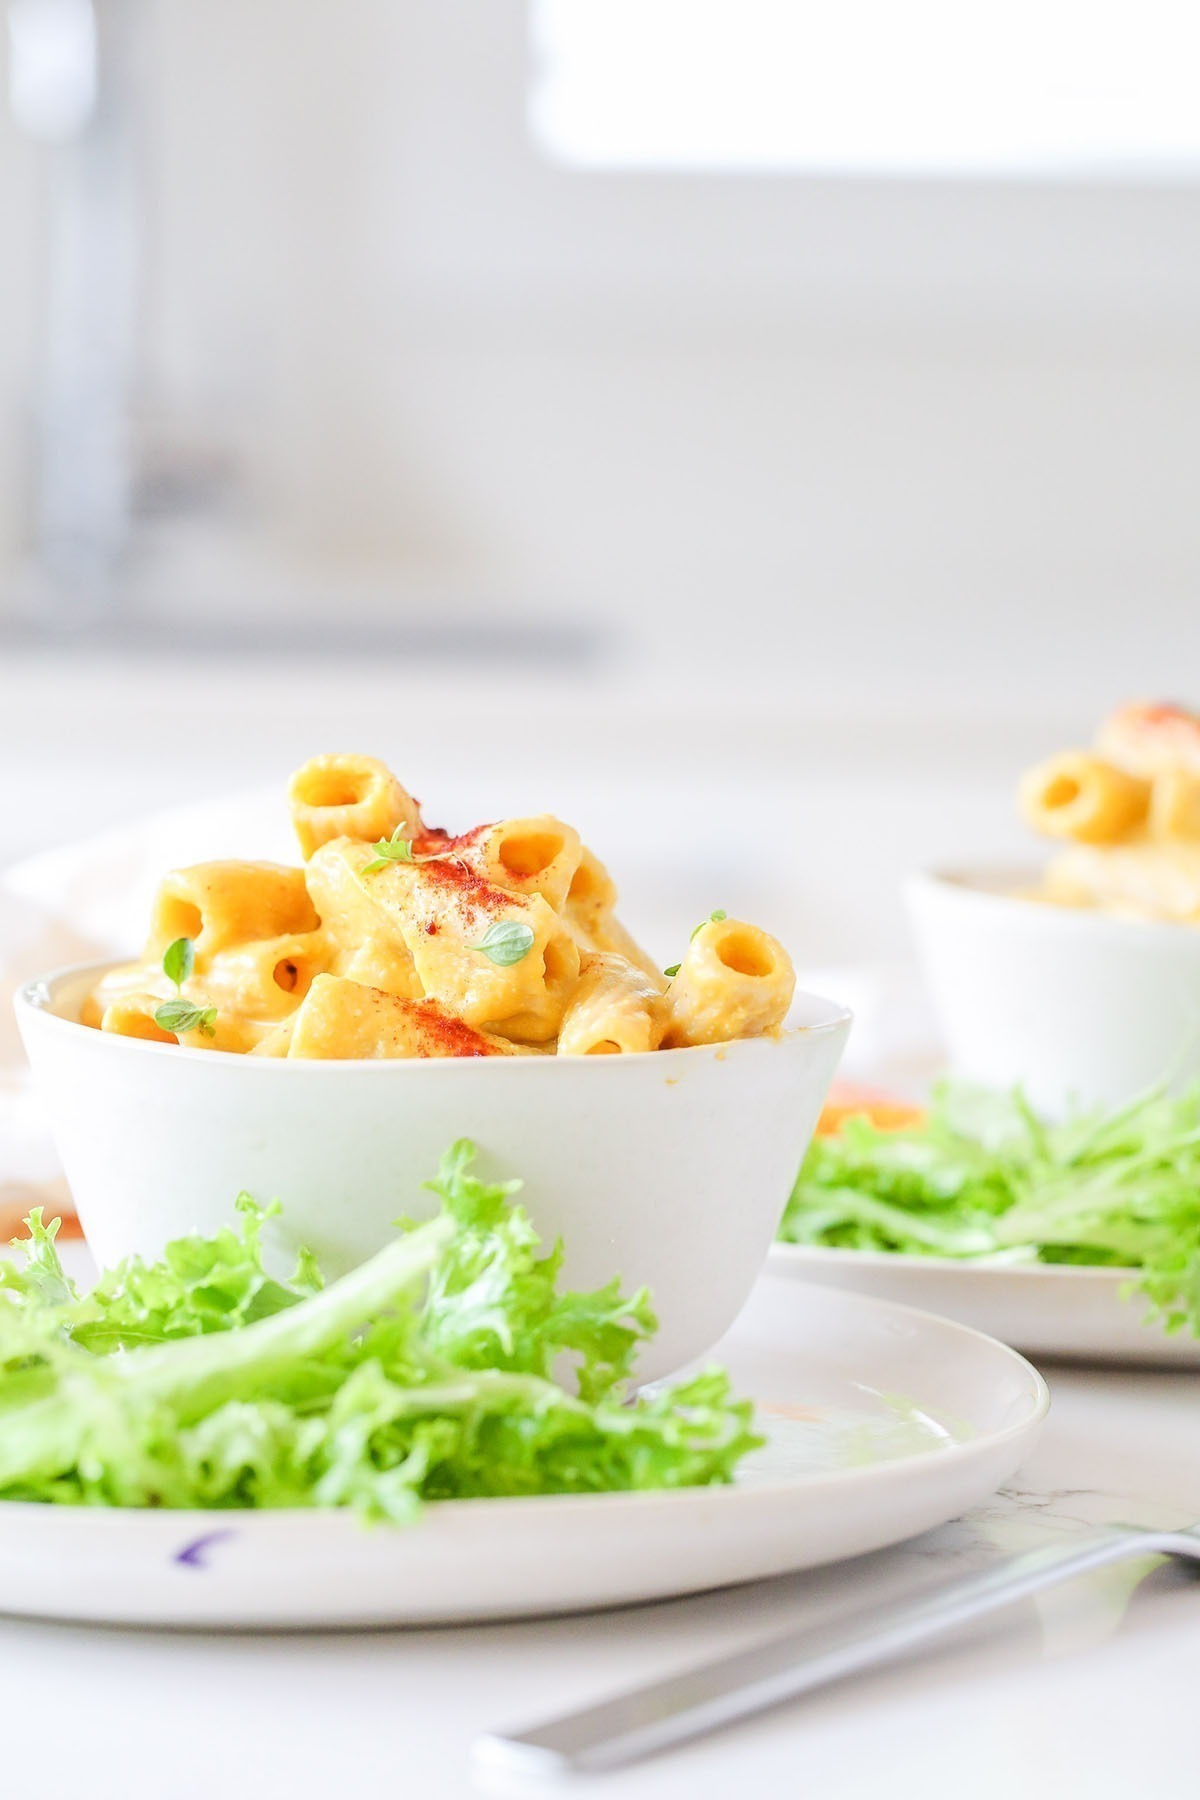 Best ever, easy, gluten, and dairy free mac and cheese. Low in fat, easy as to make nut-free , and all round delicious! Comfort food gone healthy.